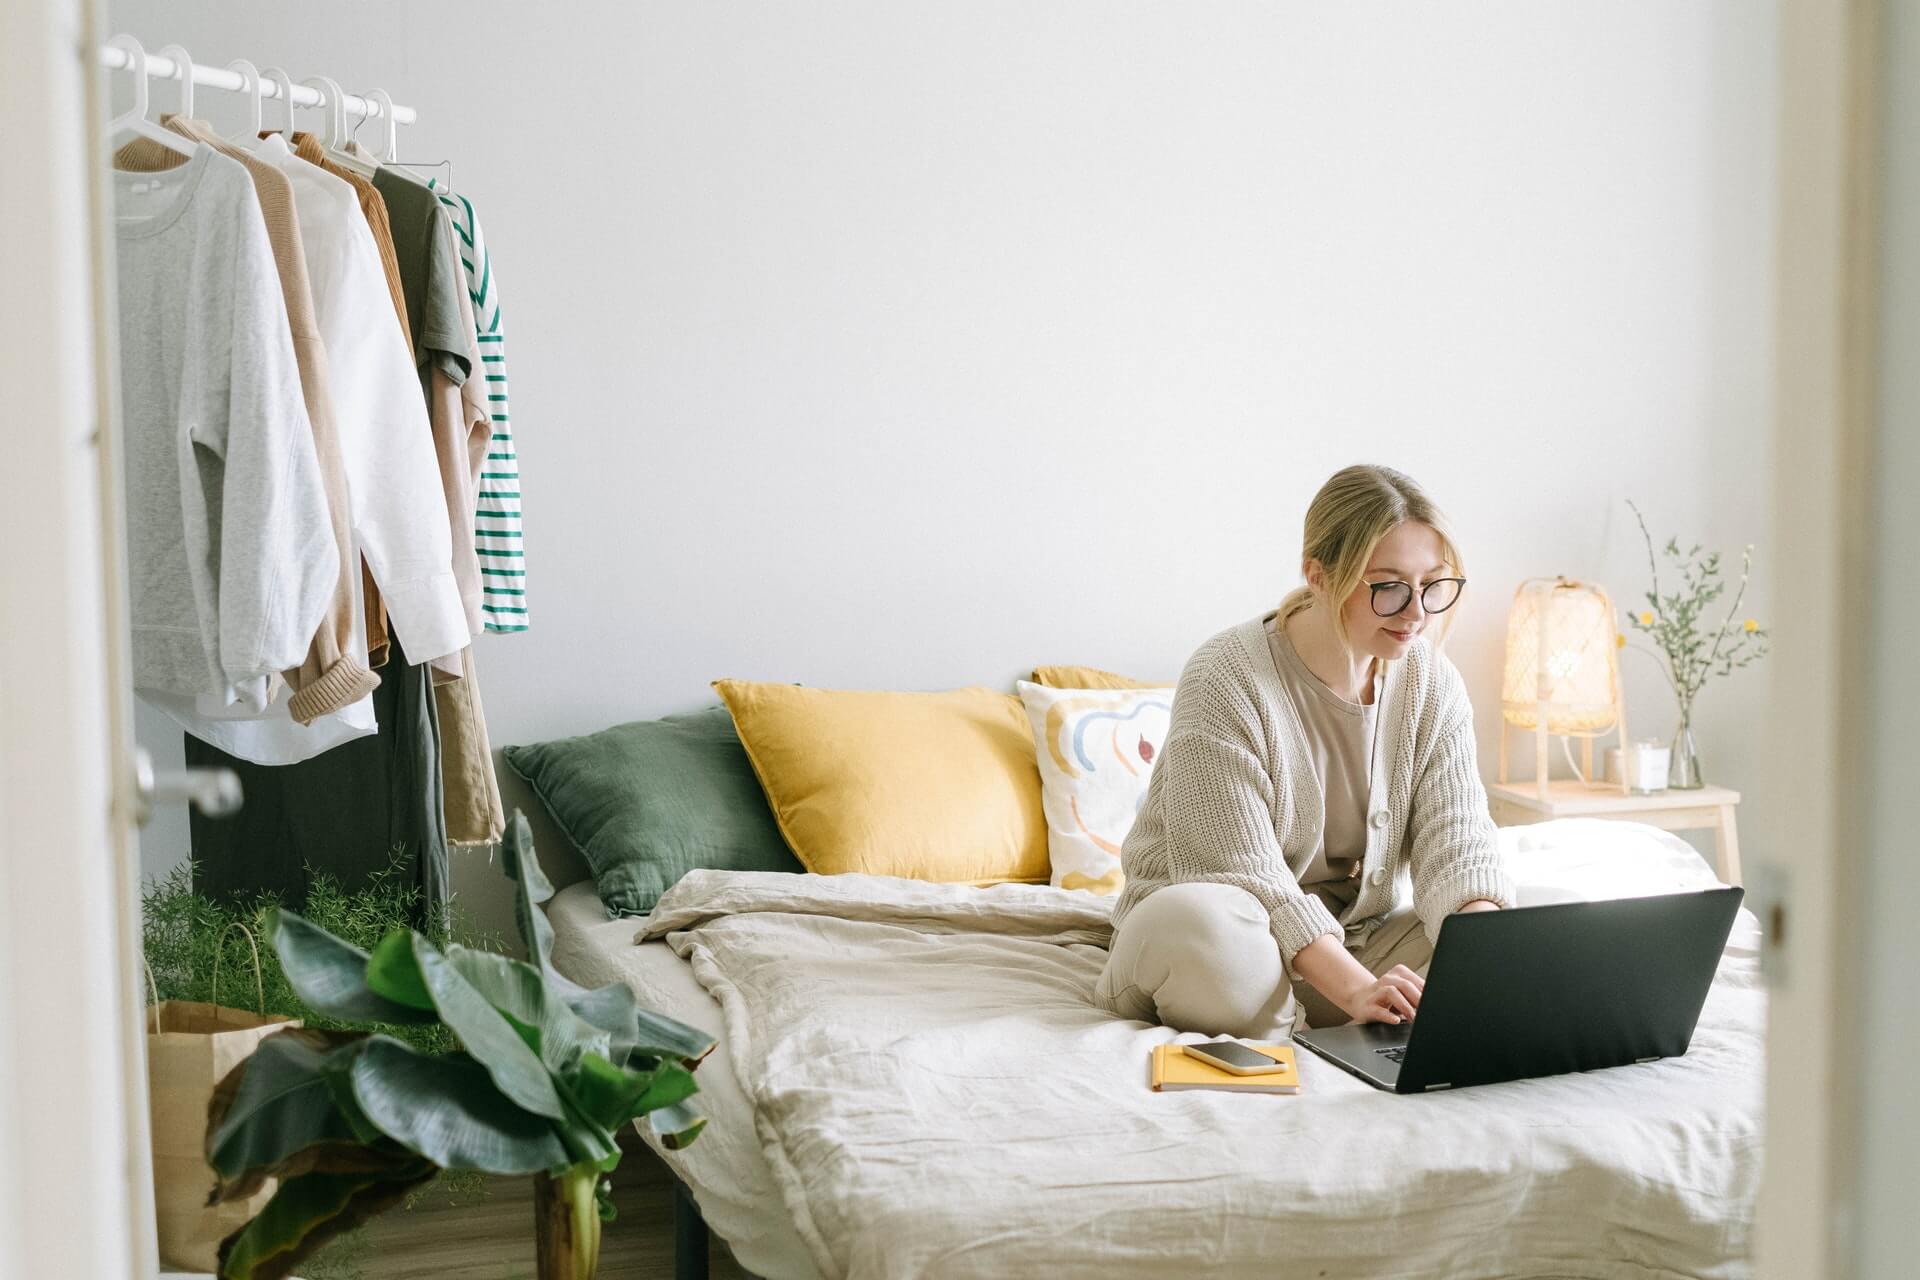 Is remote work really that much better?